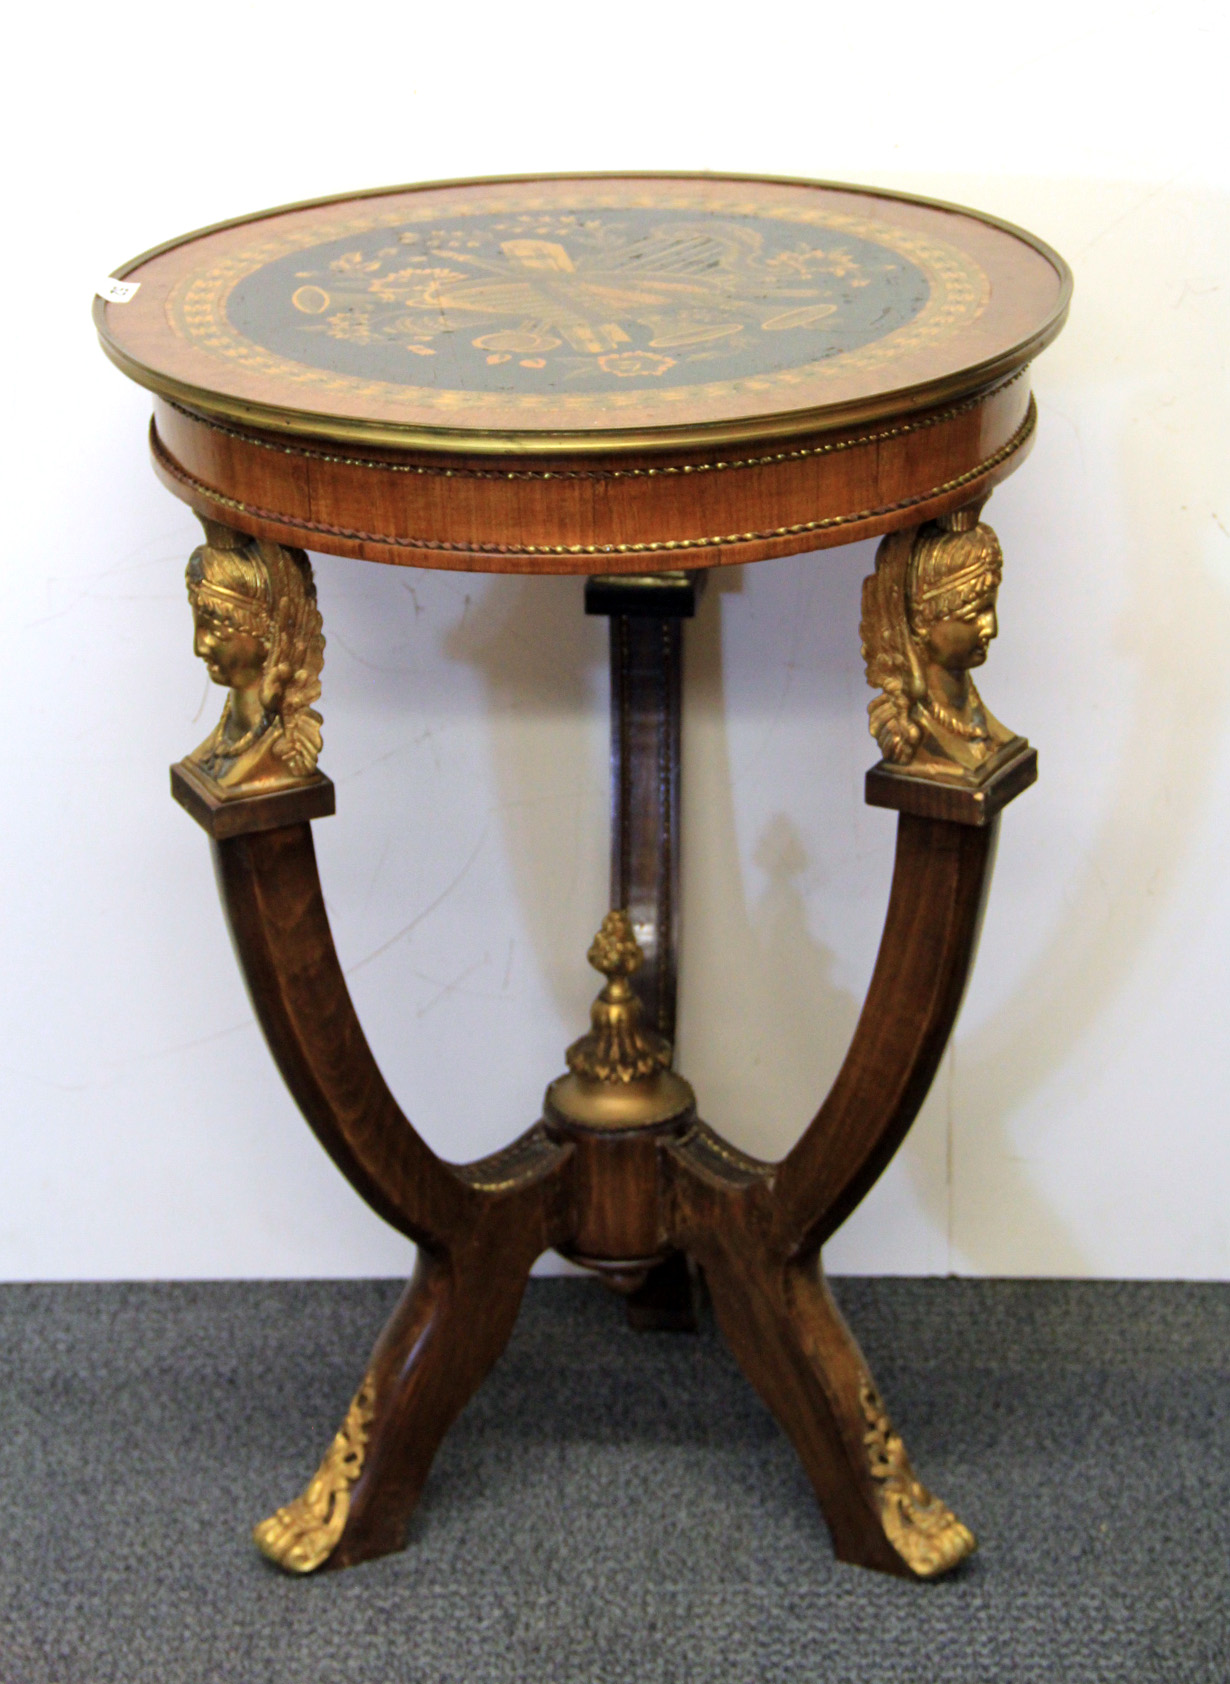 A French ormolu mounted and burr veneered mahogany table with painted decoration to top simulating